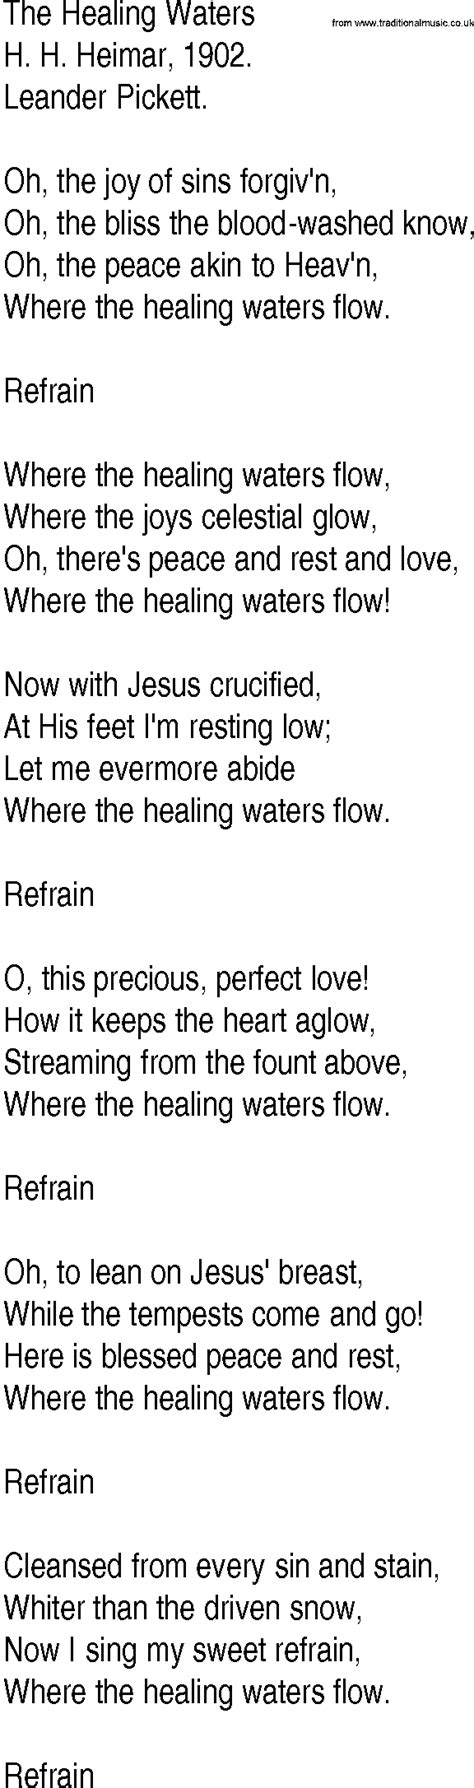 See more ideas about gospel song, music heals, gospel. Hymn and Gospel Song Lyrics for The Healing Waters by H H Heimar